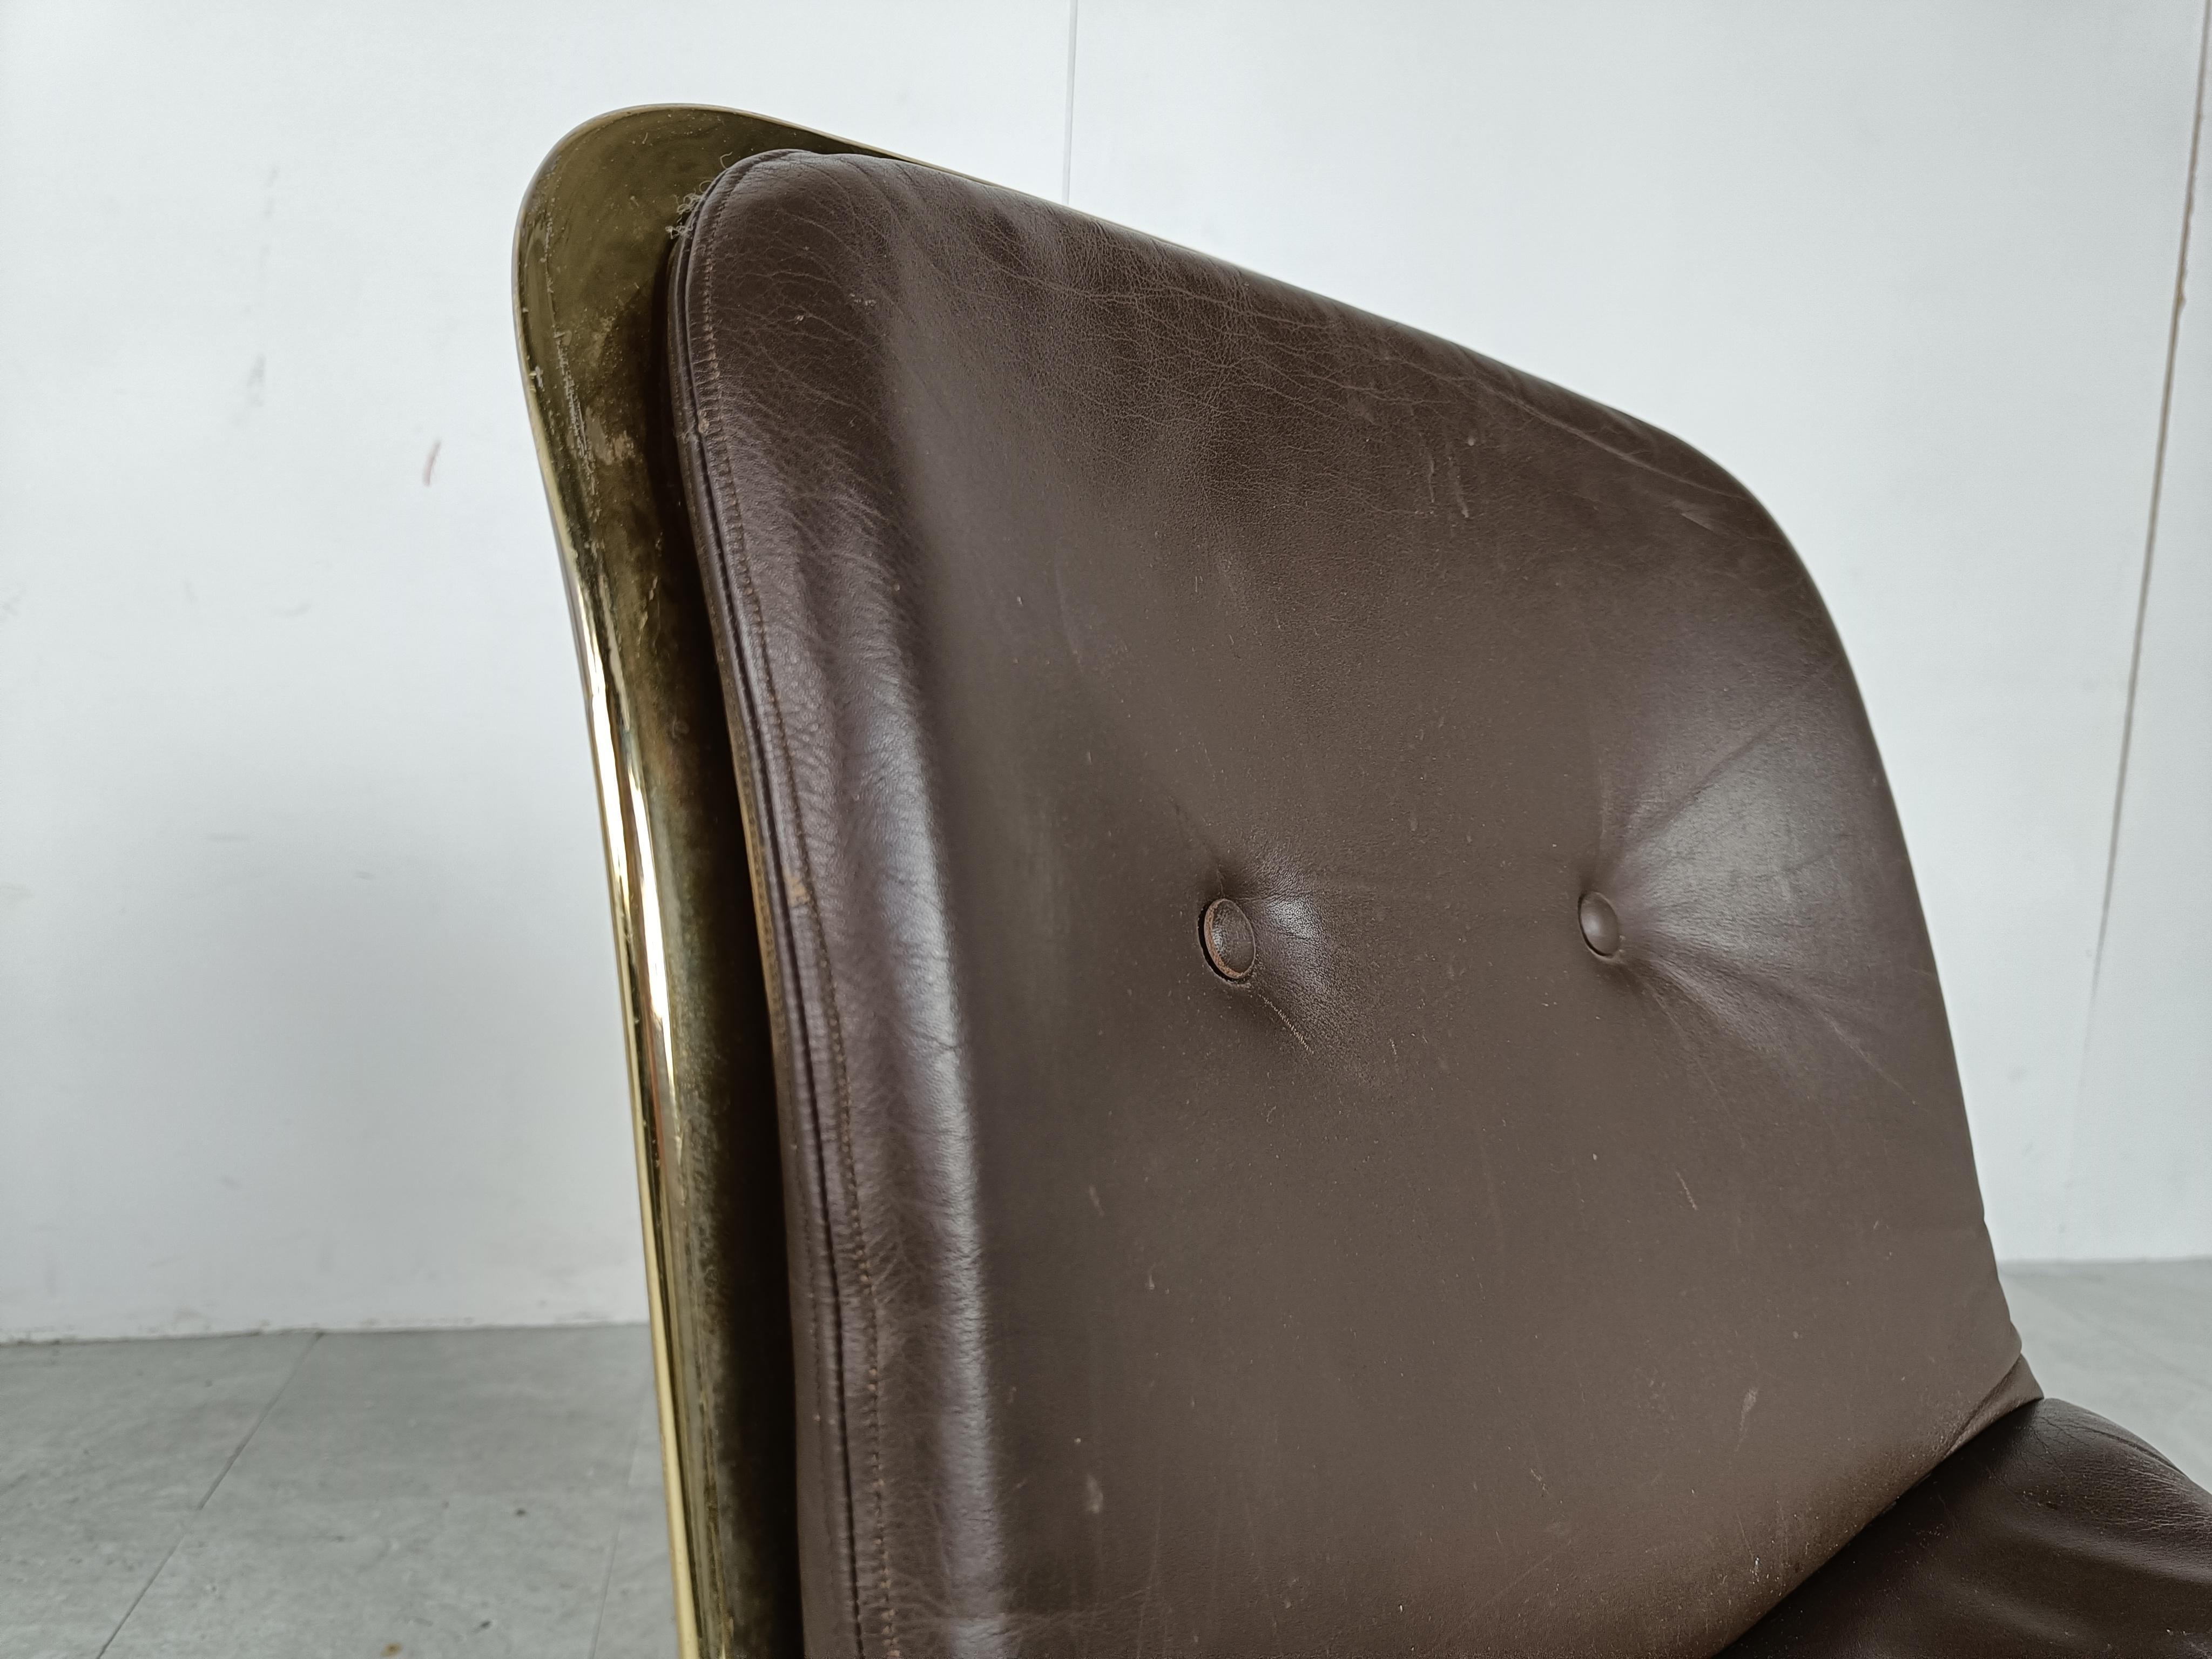 Set of 6 dining chairs designed by Willy Rizzo for Cidue

The chairs have a beautifully shaped brass frame and come with the original dark brown leather seats.

Rare to find them with brass frames.

Good vintage condition with age related